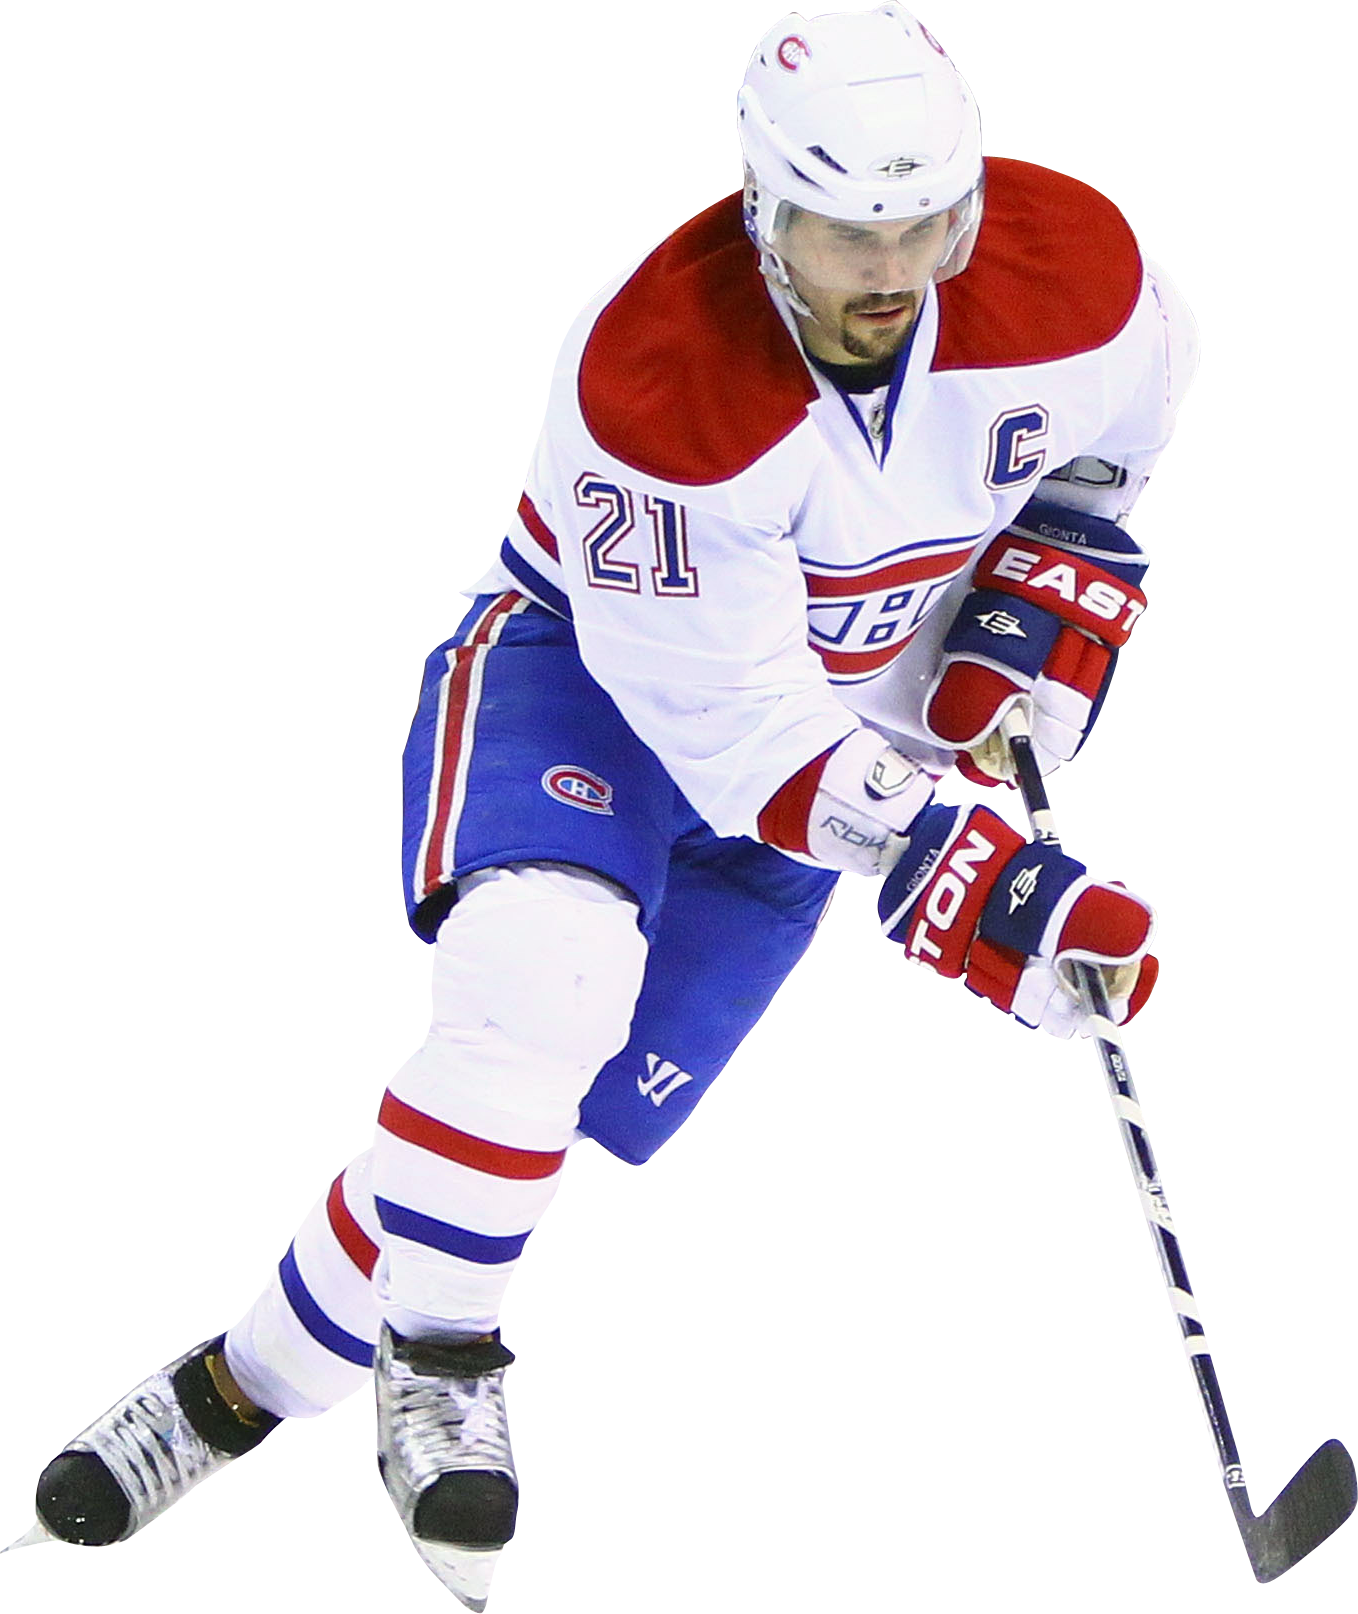 Hockey PNG HD and Transparent